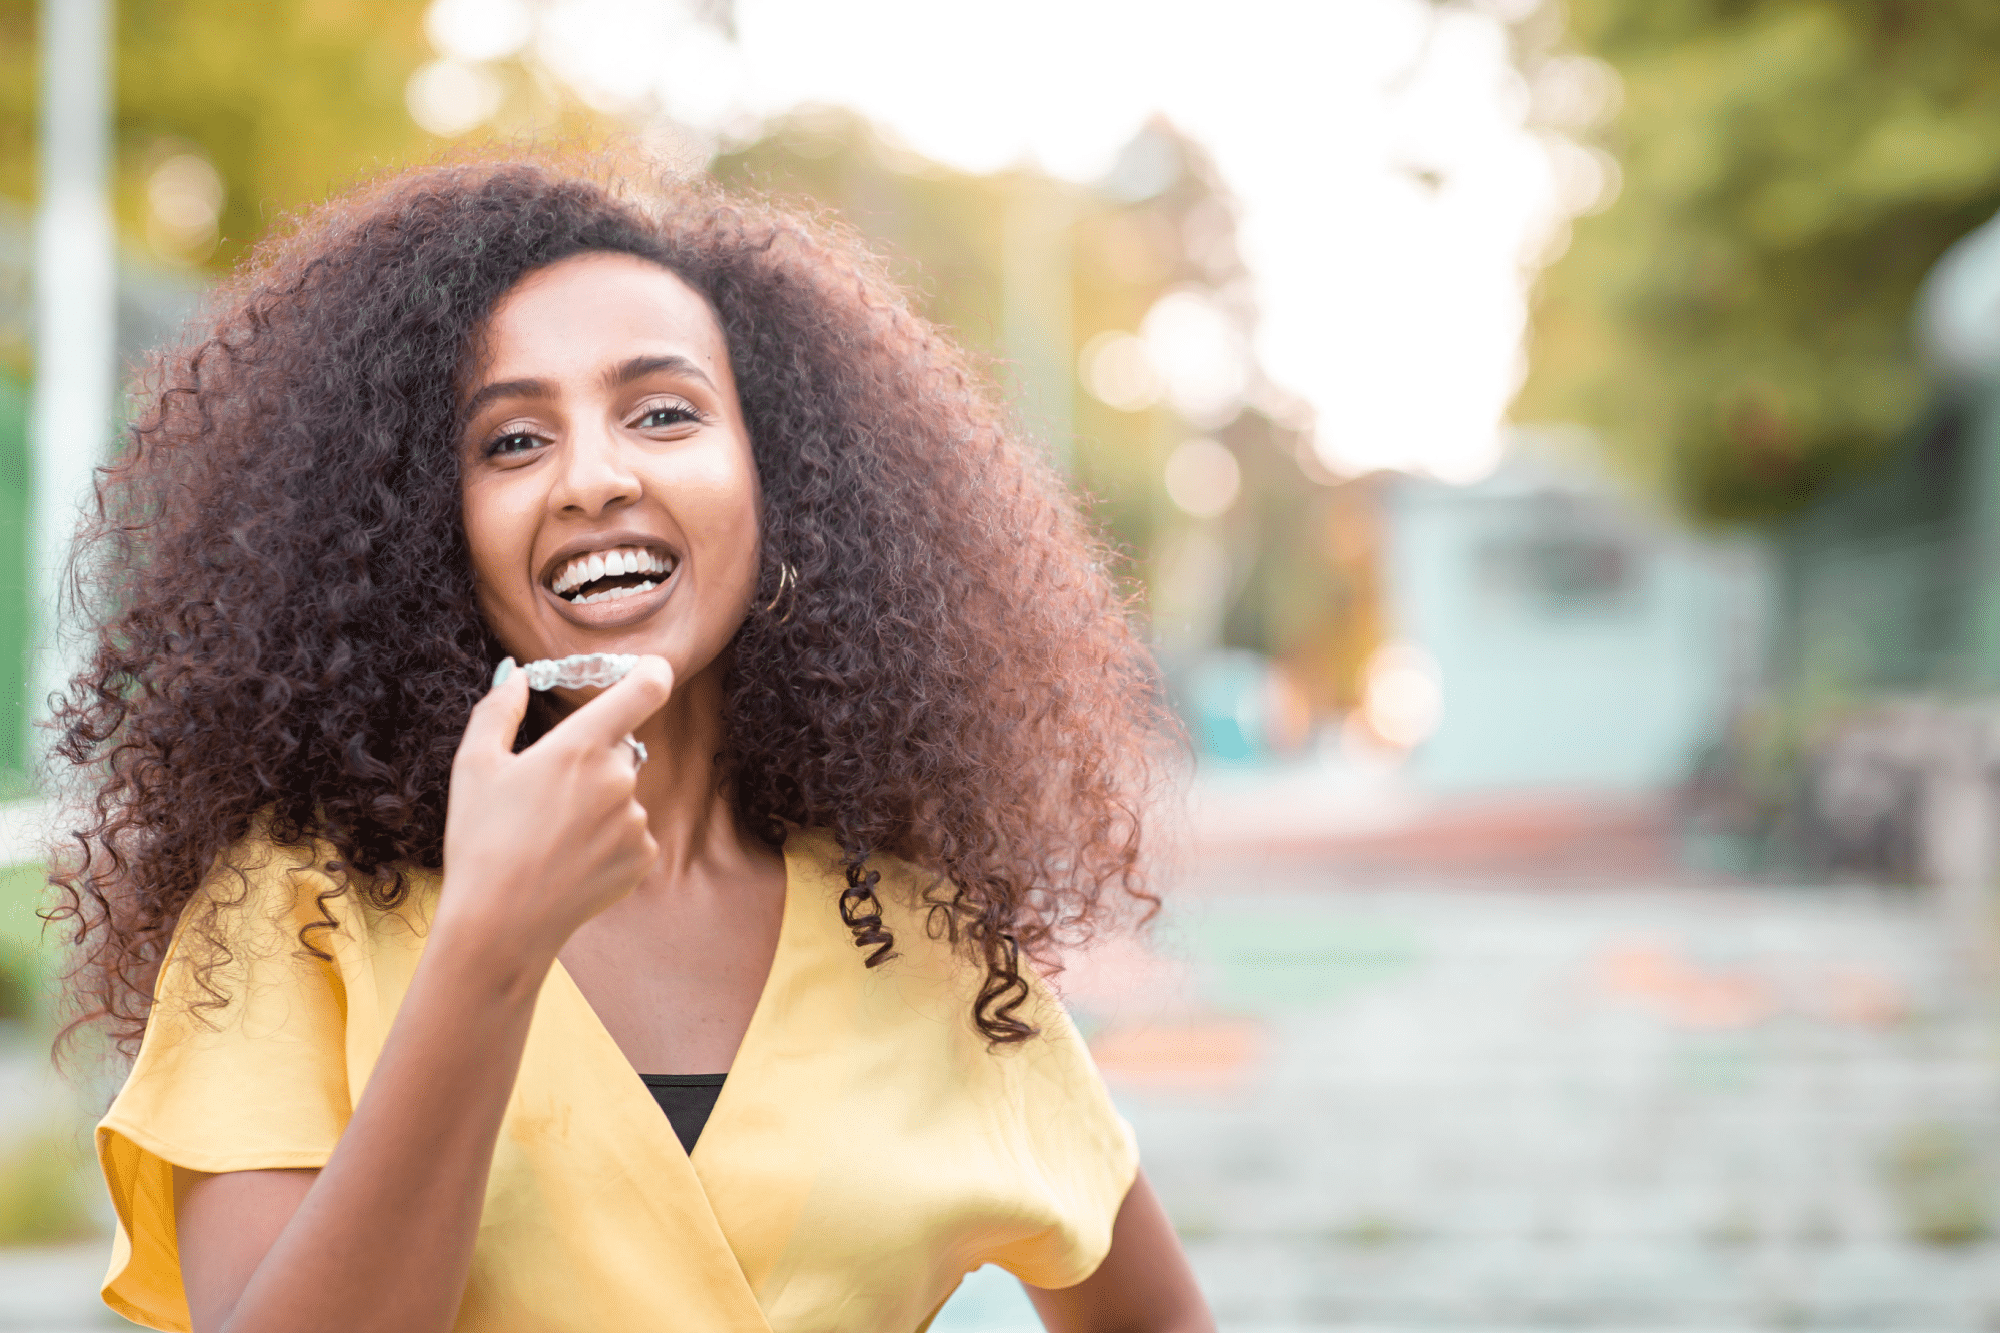 Benefits of Invisalign: The Ultimate Guide for Dental Patients, invisalign palmdale, Dr. Jason Oh, Dr. Shanne Sastiel, Dr. Michael Tran, Dr. Catherine Vu, and Dr. Hanseen, Palmdale, CA, Restorative, Cosmetic Dentistry